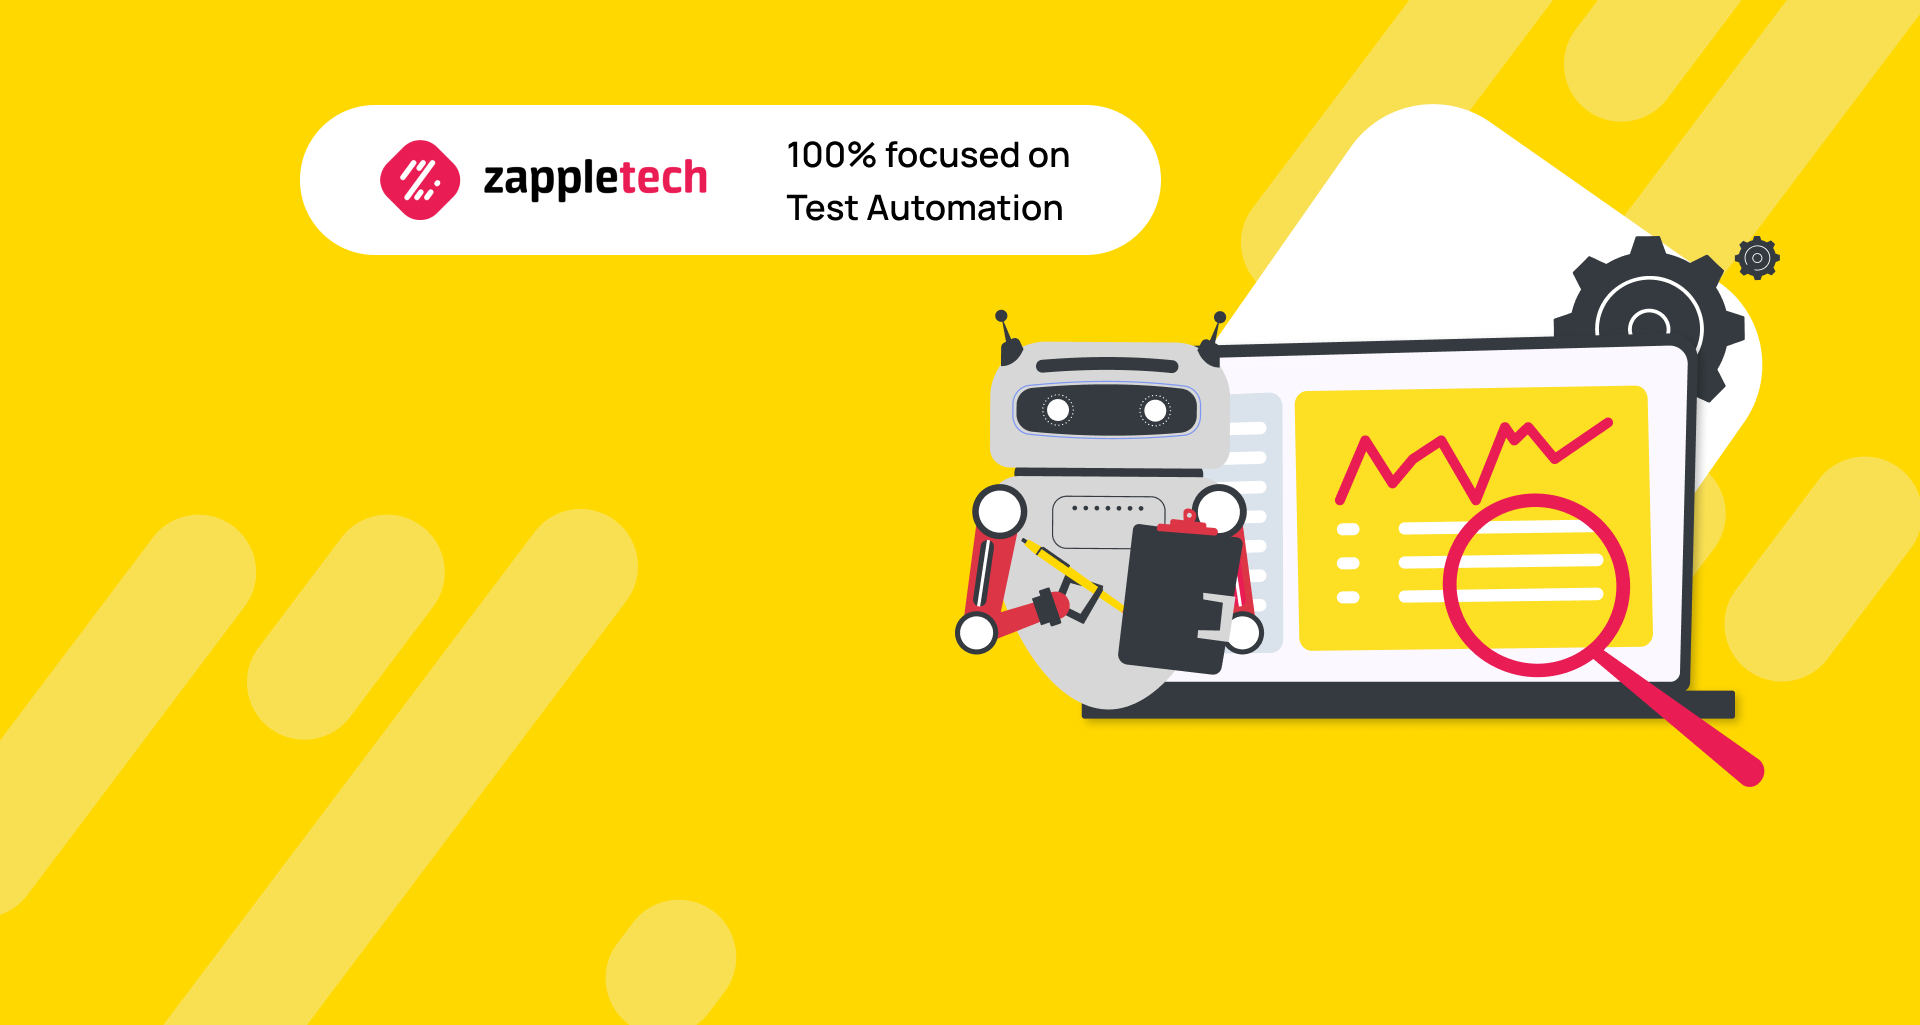 How to Avoid Risks in Testing Through Automation?